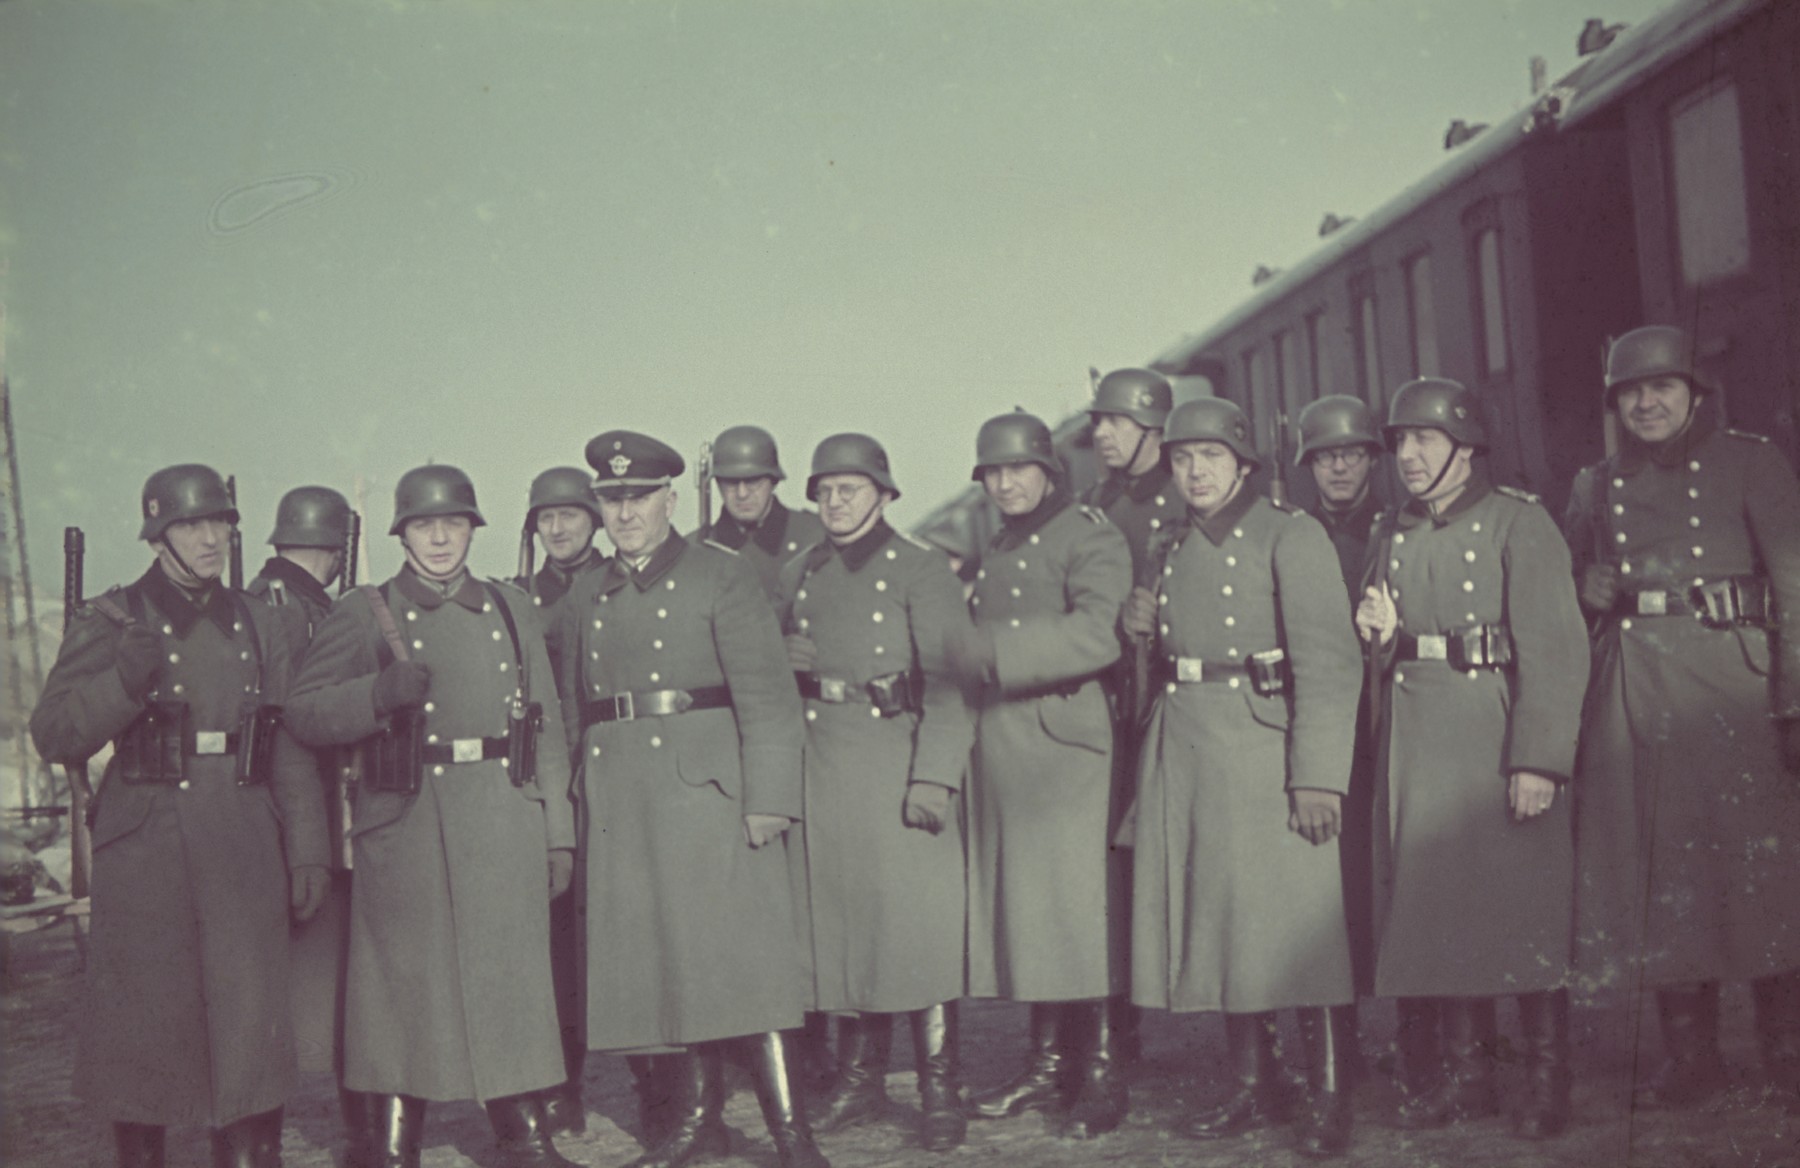 A unit of deportation police (Evakuierungspolizei) poses in the Lodz ghetto in the spring of 1942.

Original German caption: "Evakueringspolizei" (deportation police), spring 1942, #128 (number somewhat blurred and hard to read.)